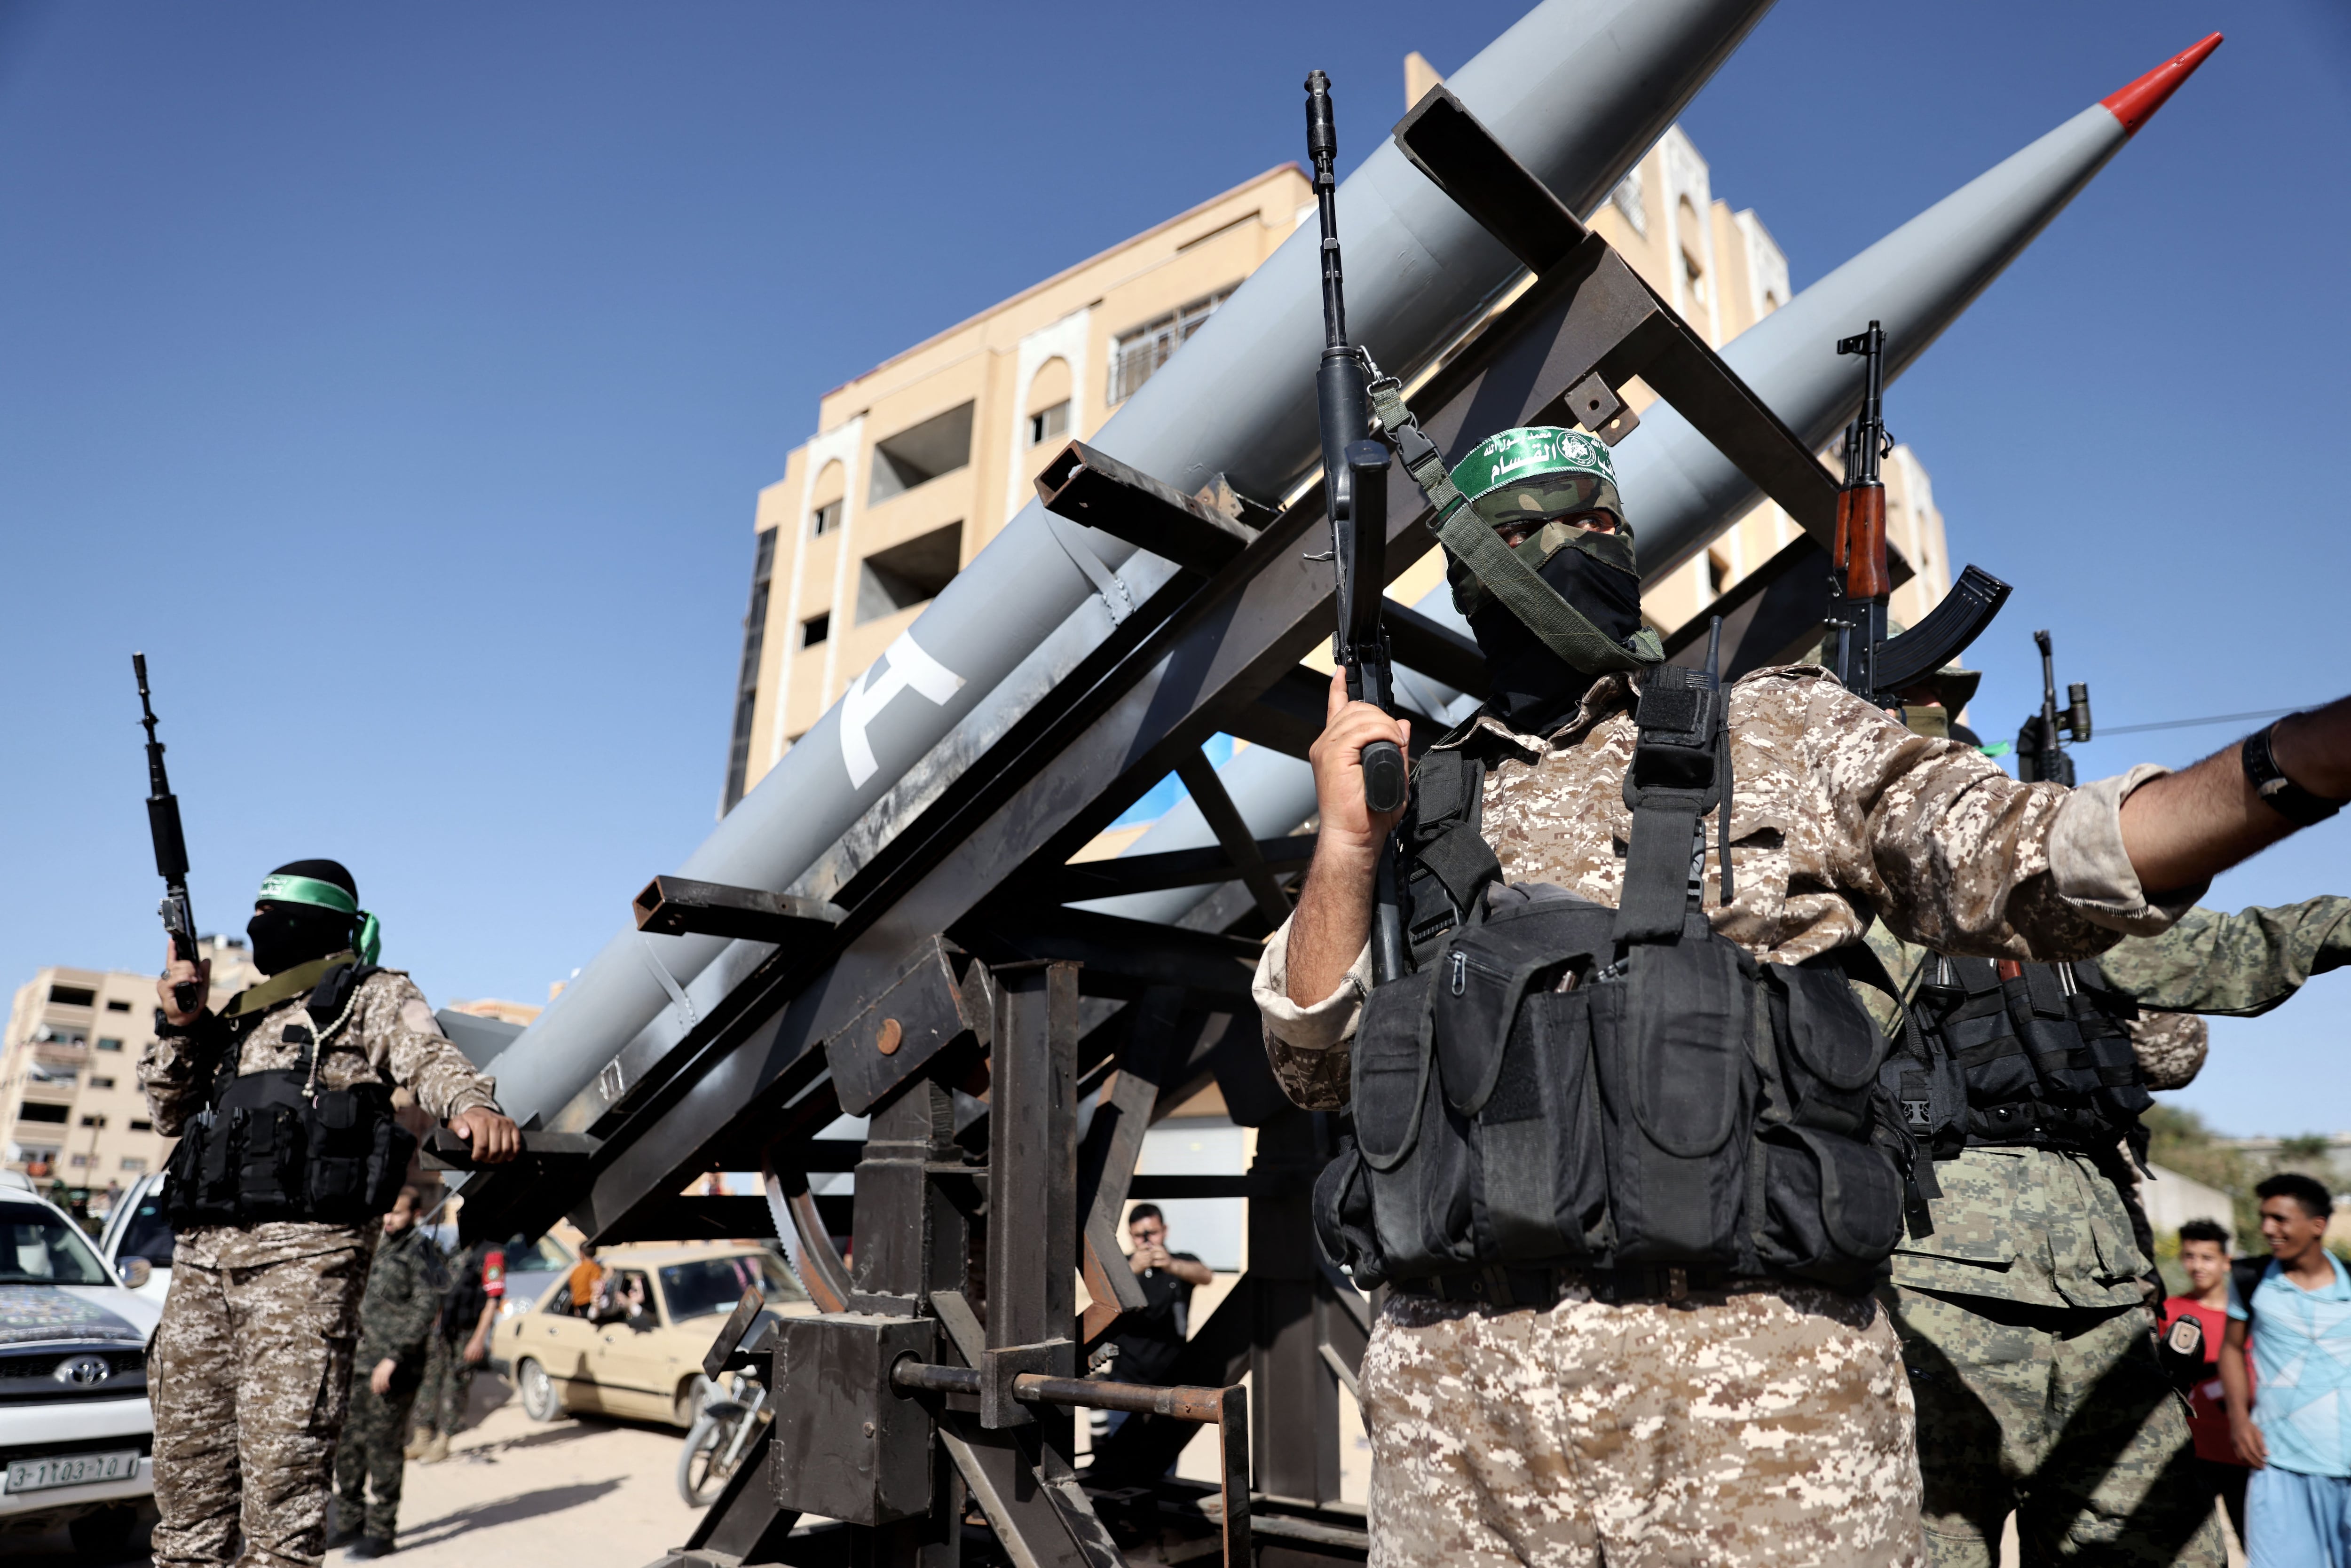 Members of the Ezz-Al Din Al-Qassam Brigades, the armed wing of the Hamas movement, parade in a truck with rockets in Khan Yunis, in the south of the Gaza Strip, on May 27, 2021. (Photo by THOMAS COEX / AFP) .